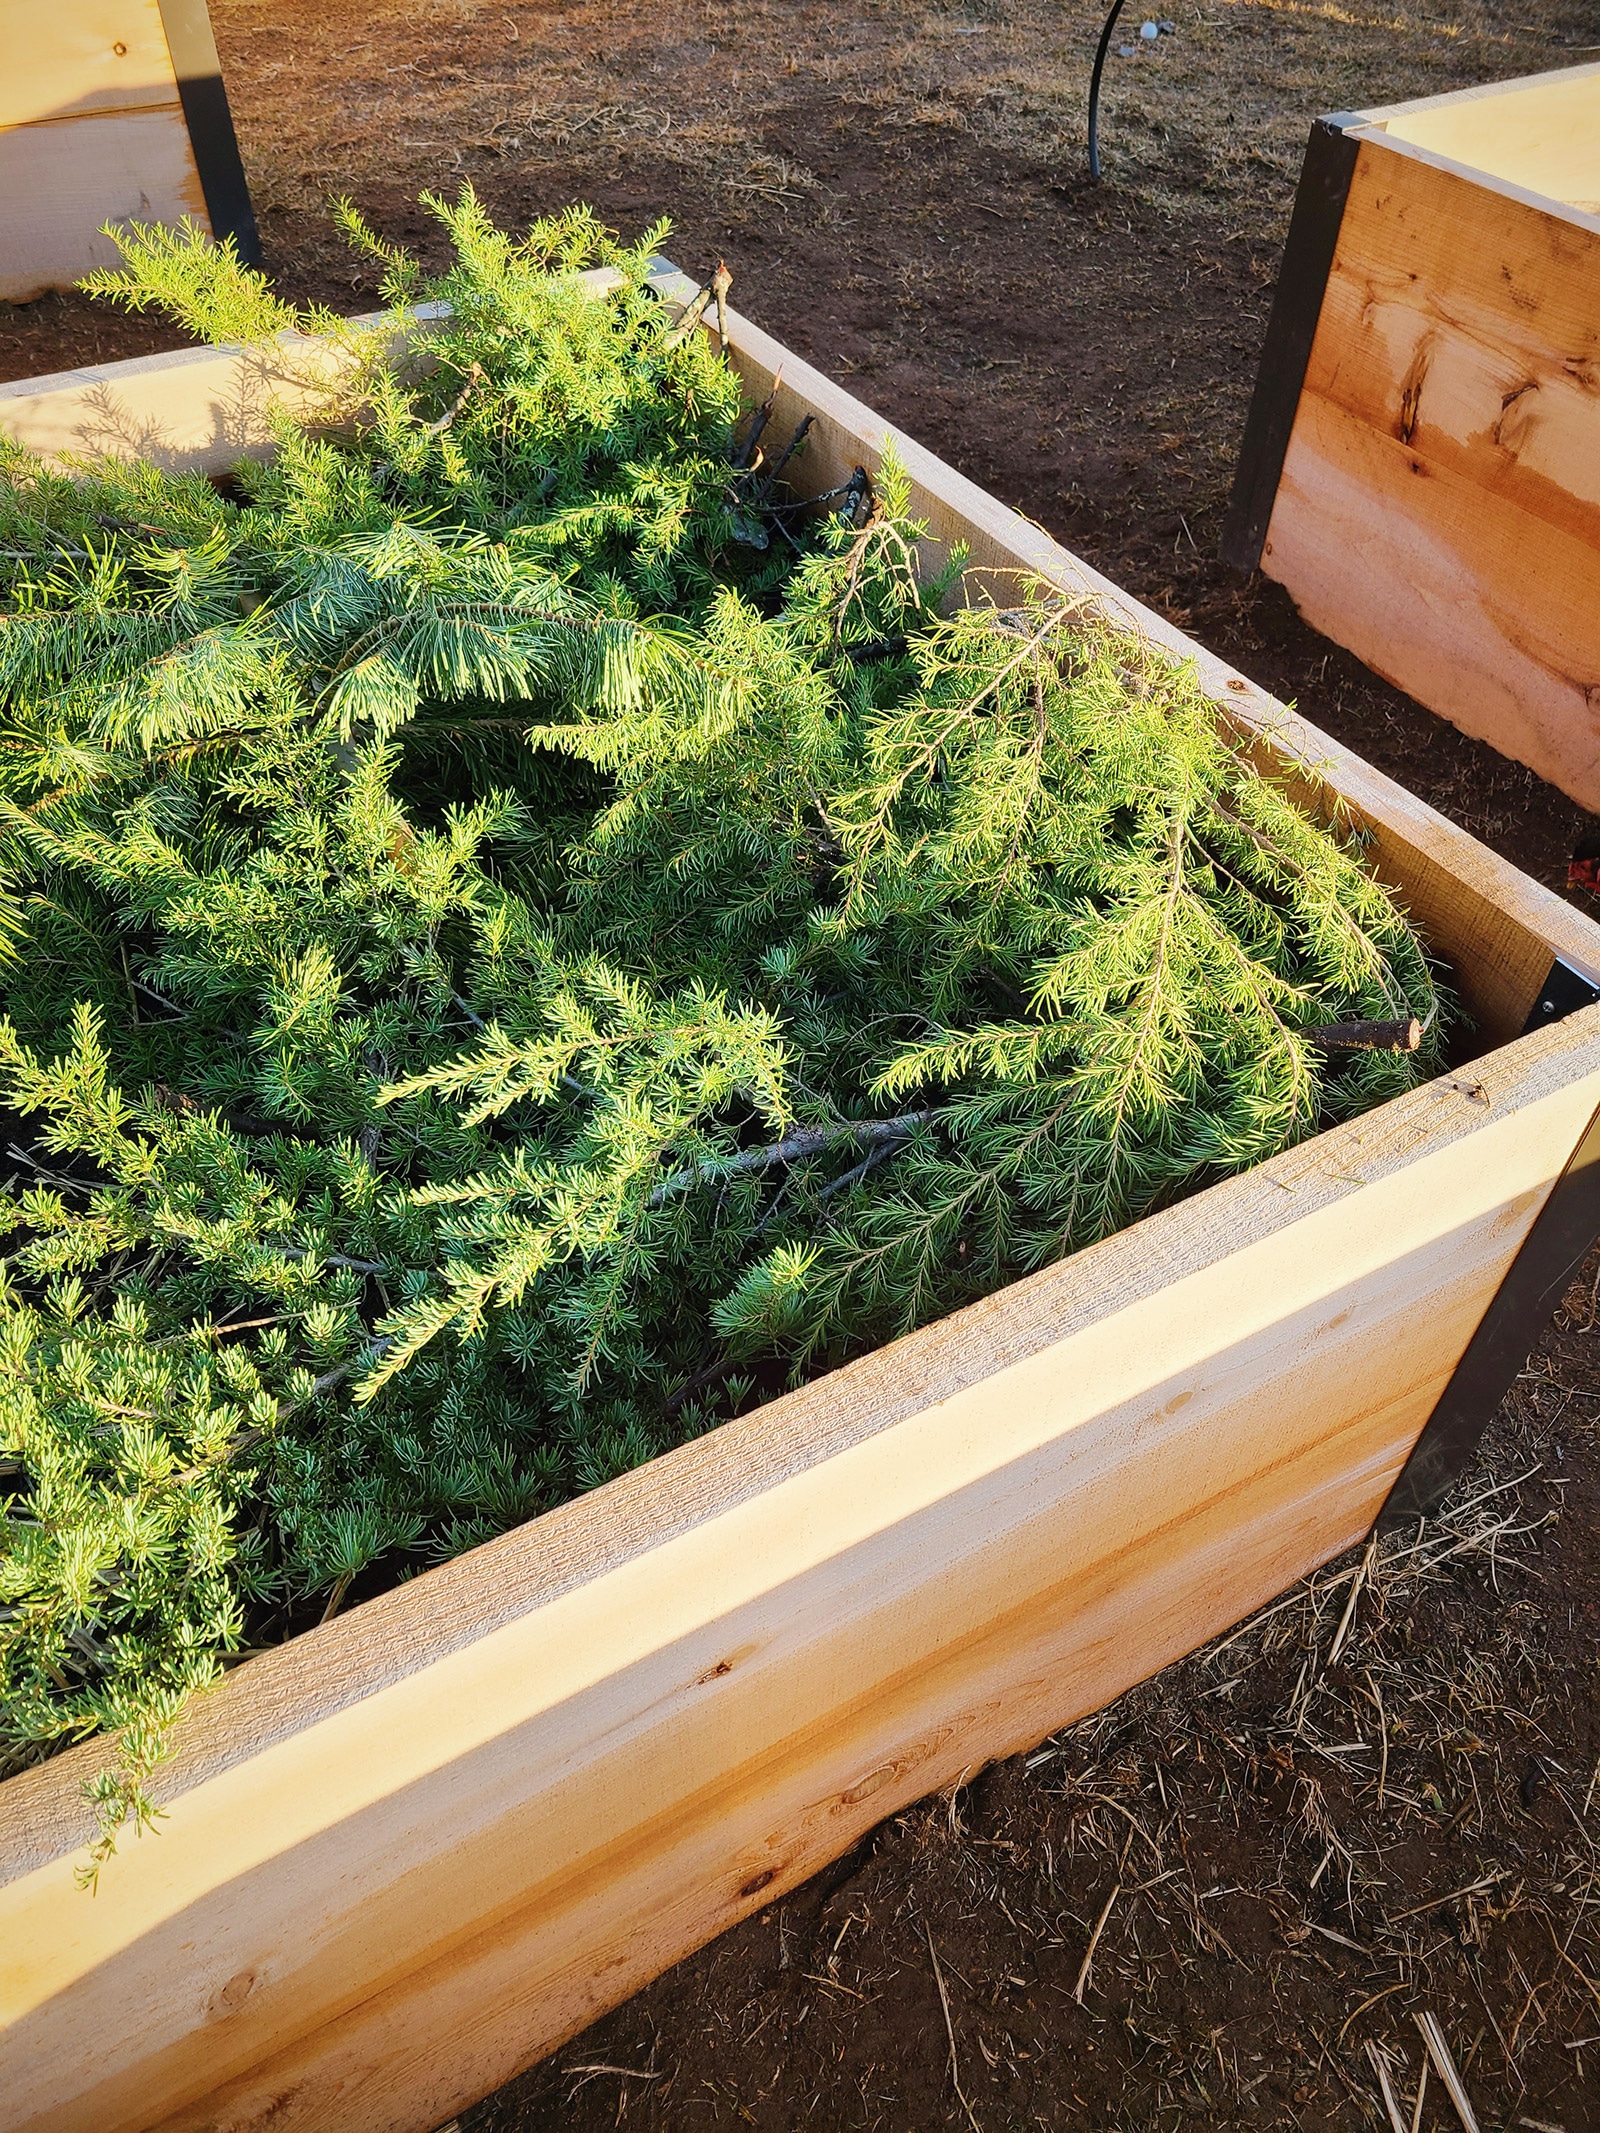 A raised bed covered in evergreen boughs used as mulch